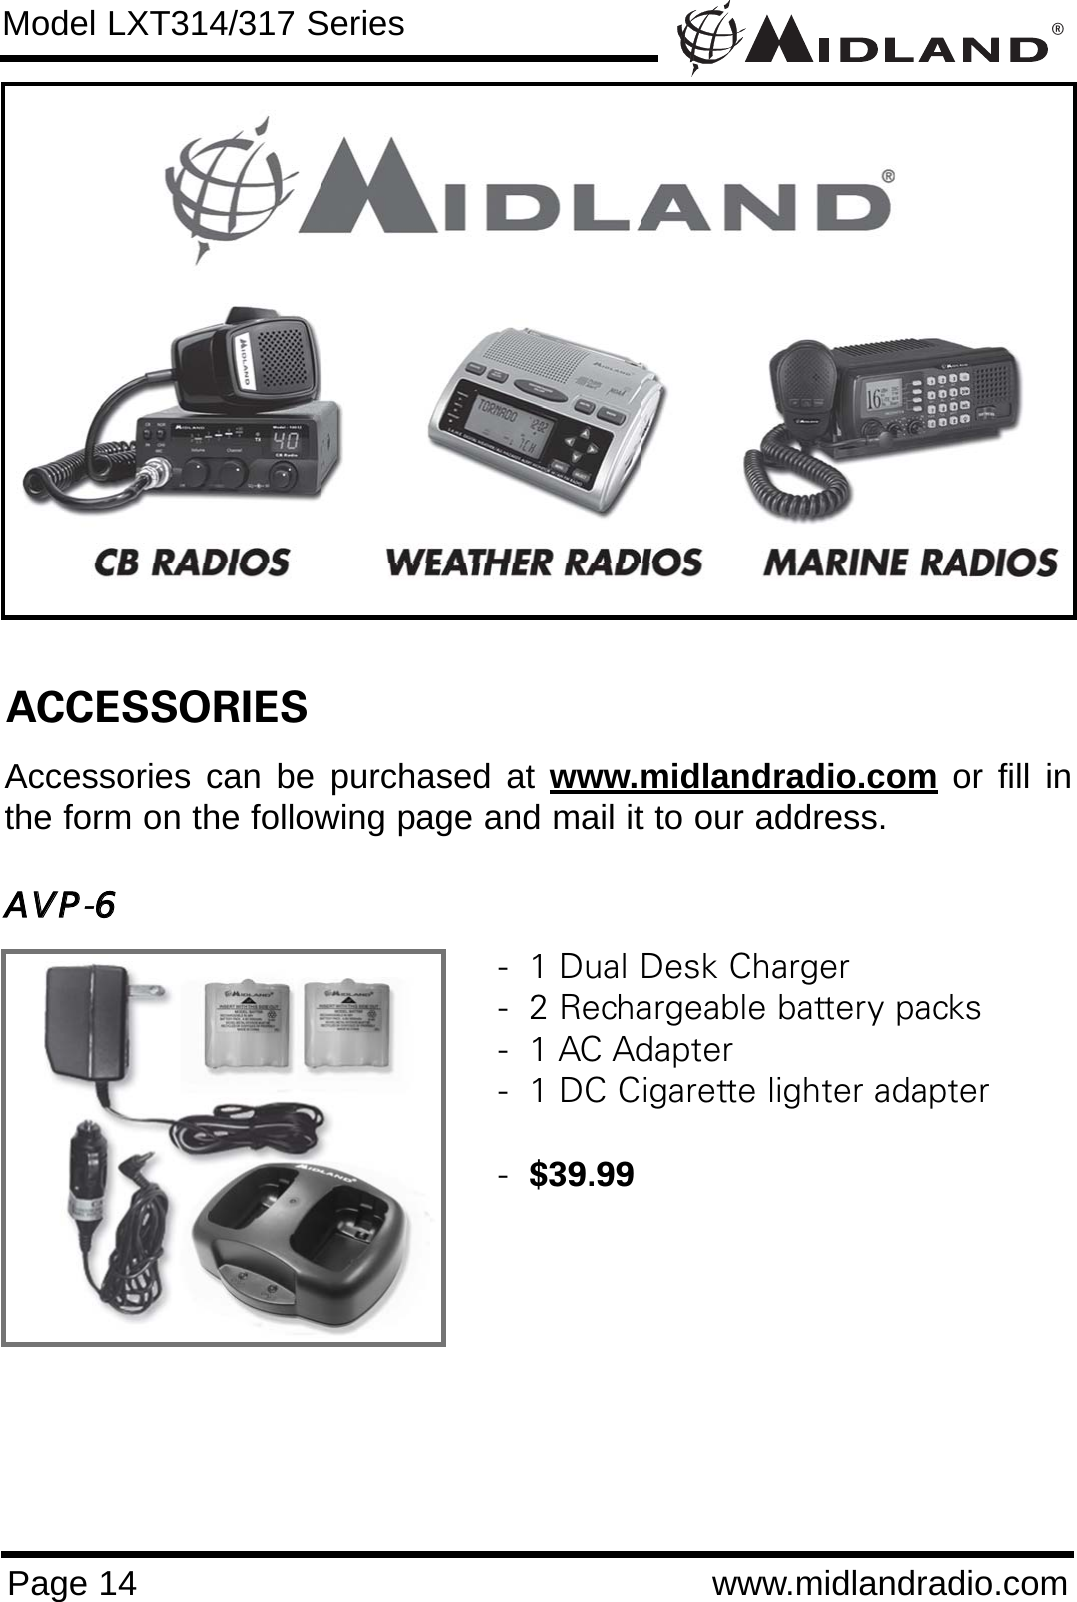 ®Page 14 www.midlandradio.comModel LXT314/317 SeriesACCESSORIESAccessories can be purchased at www.midlandradio.com or fill inthe form on the following page and mail it to our address.AAVVPP-66-  1 Dual Desk Charger-  2 Rechargeable battery packs-  1 AC Adapter-  1 DC Cigarette lighter adapter-  $39.99